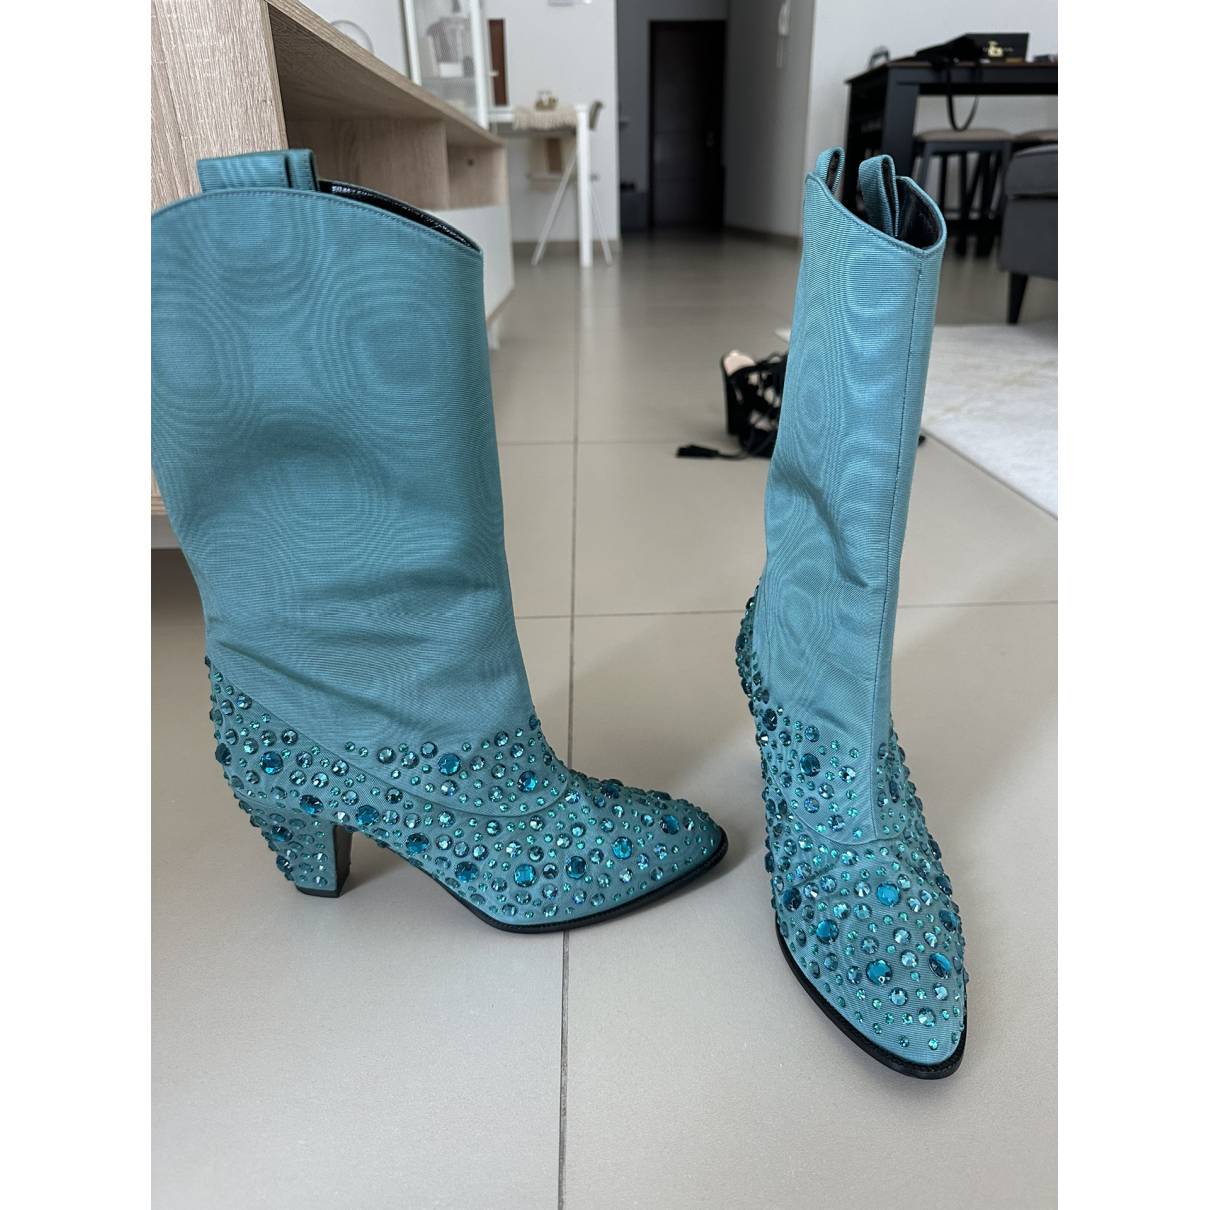 Gucci - Authenticated Boots - Cloth Blue for Women, Never Worn